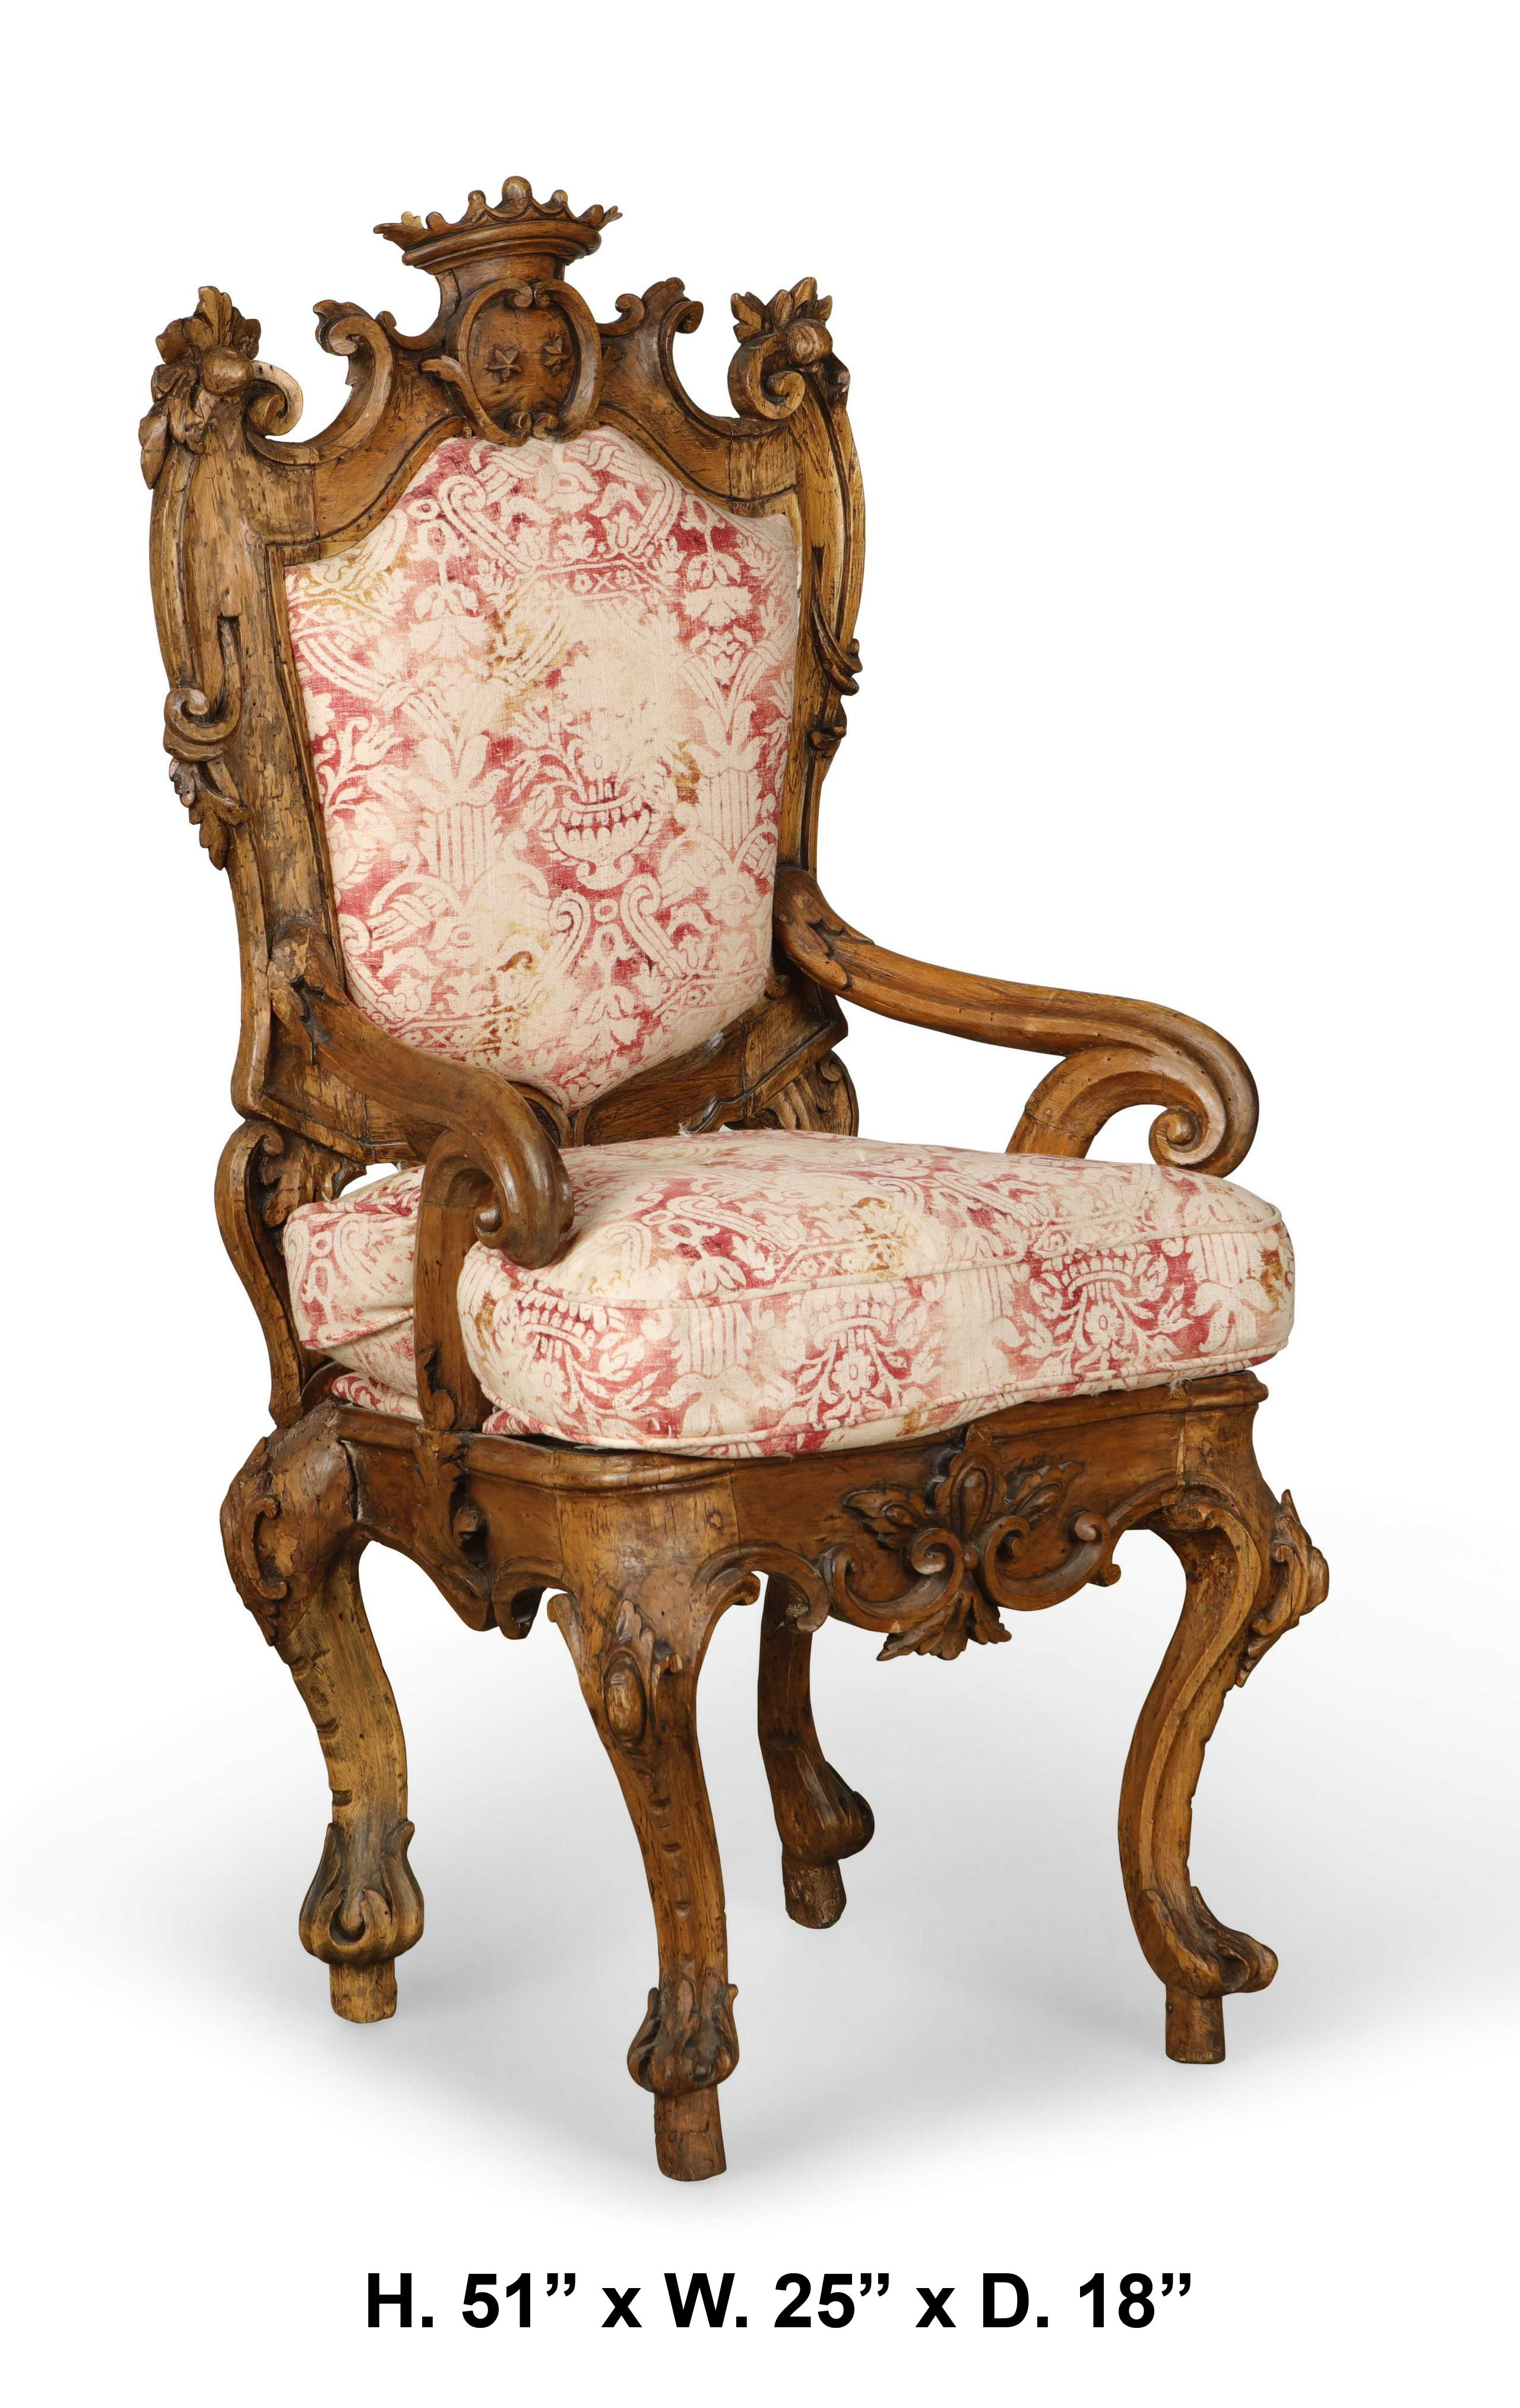 Impressive 18th century Italian hand carved walnut armchair with crown.

The armchair is with a shaped and arched padded back, beautifully scrolled arms, the scrolling crest rail is centered double C-scroll and surmounted with a finely carved